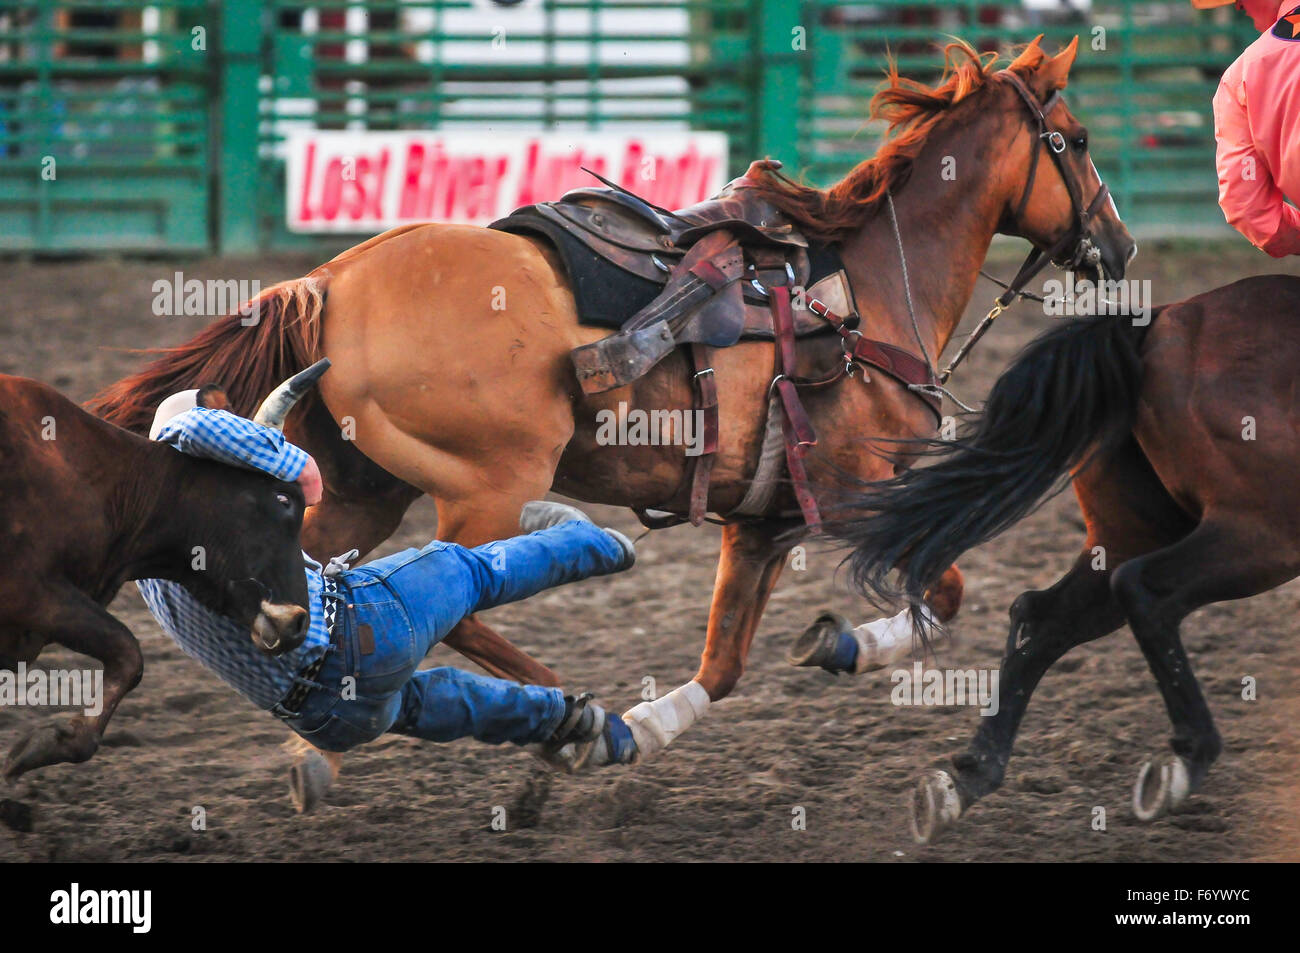 Contest at the rodeo in Idaho, witch cowboy is the fastest in catching a cow from a riding horse. Stock Photo